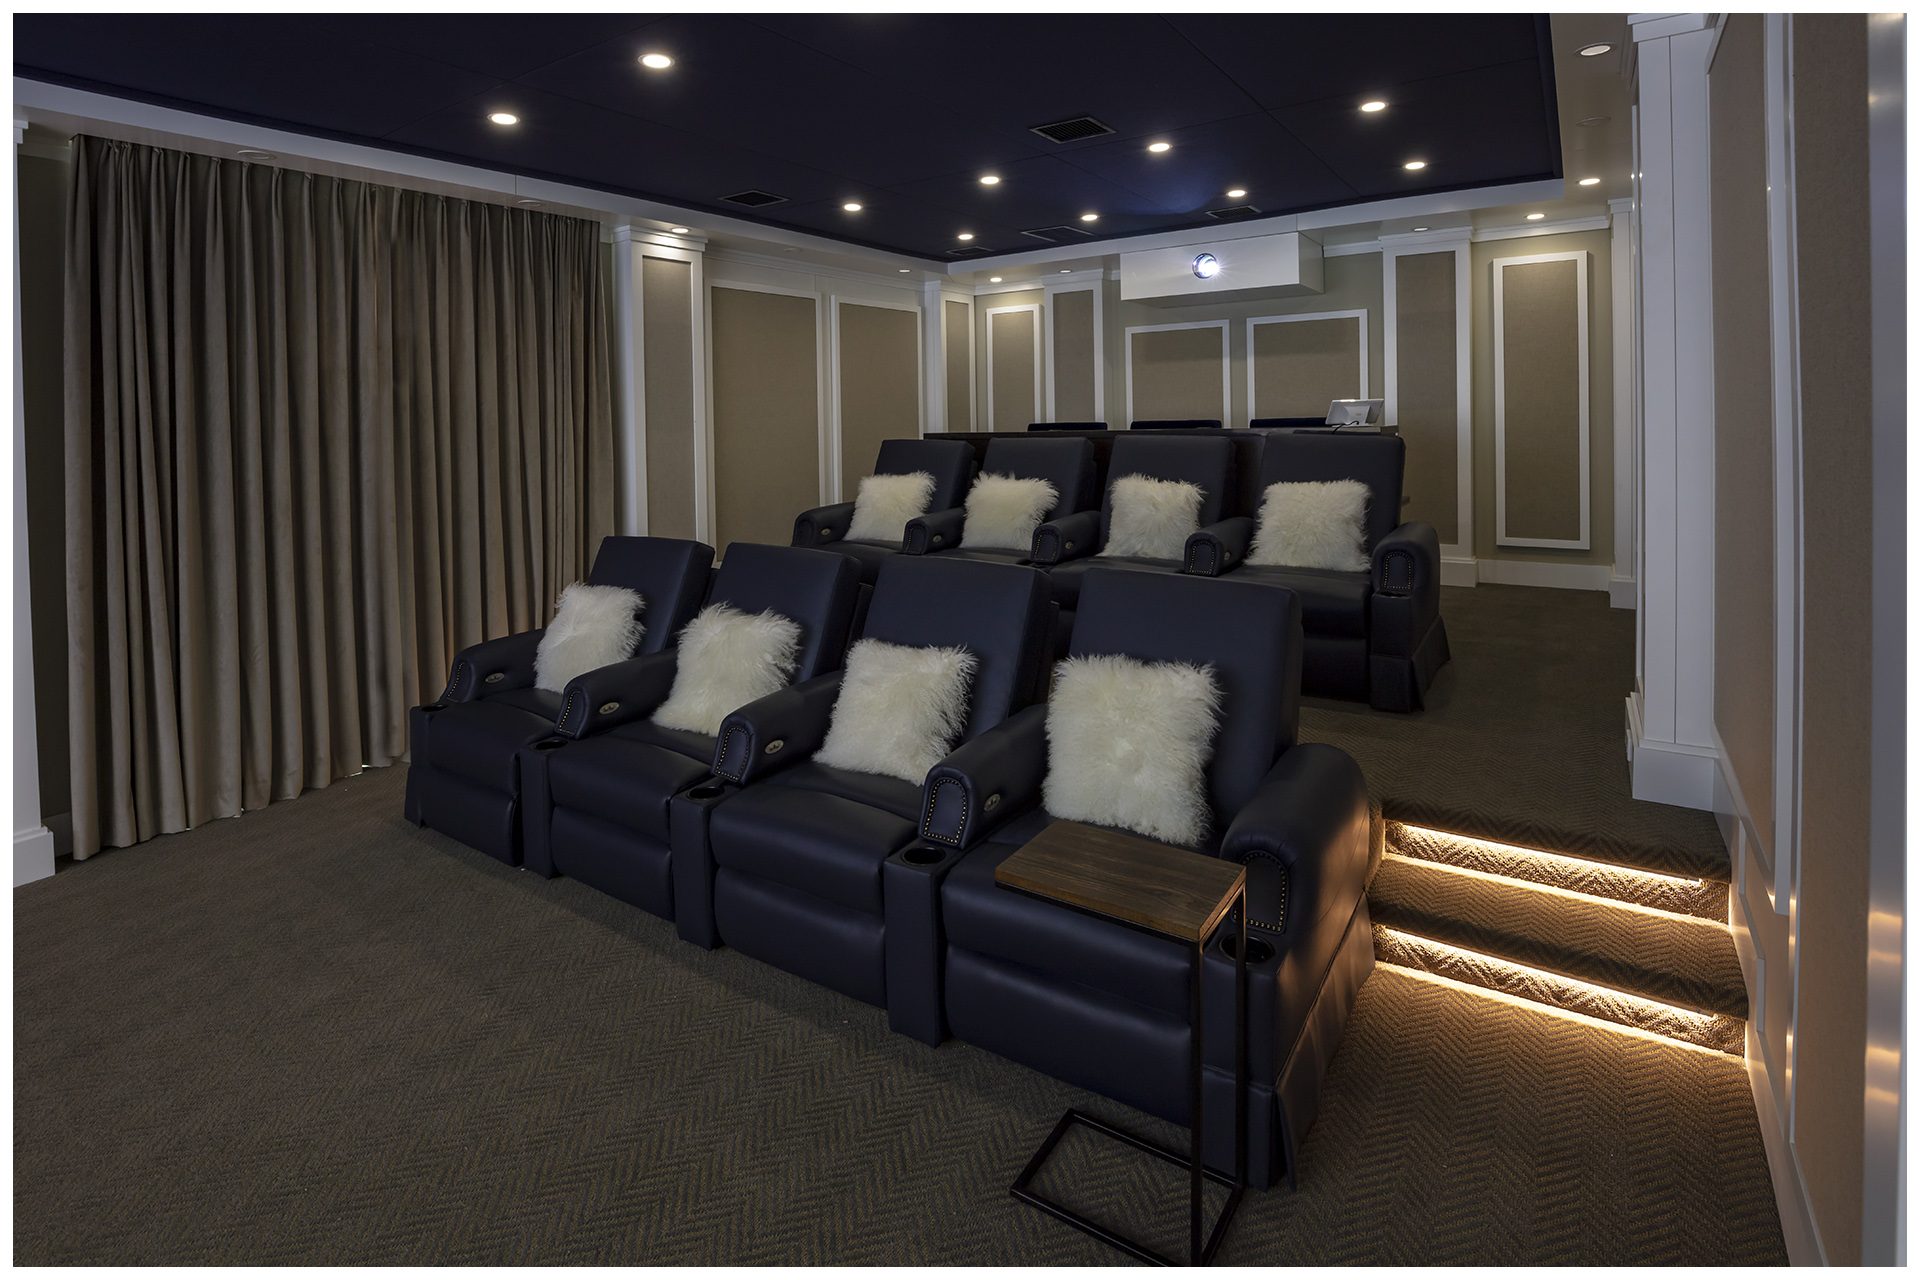 THEATER IN A DEDICATED ROOMProjector is enclosed in a sealed enclosure in the back to prevent projector noise to be audible in the room.  Electronic side drapes allow day light to come in as this room is on the main floor of the residence and owners wished for it to remain bright, open and inviting when theater is not in use.